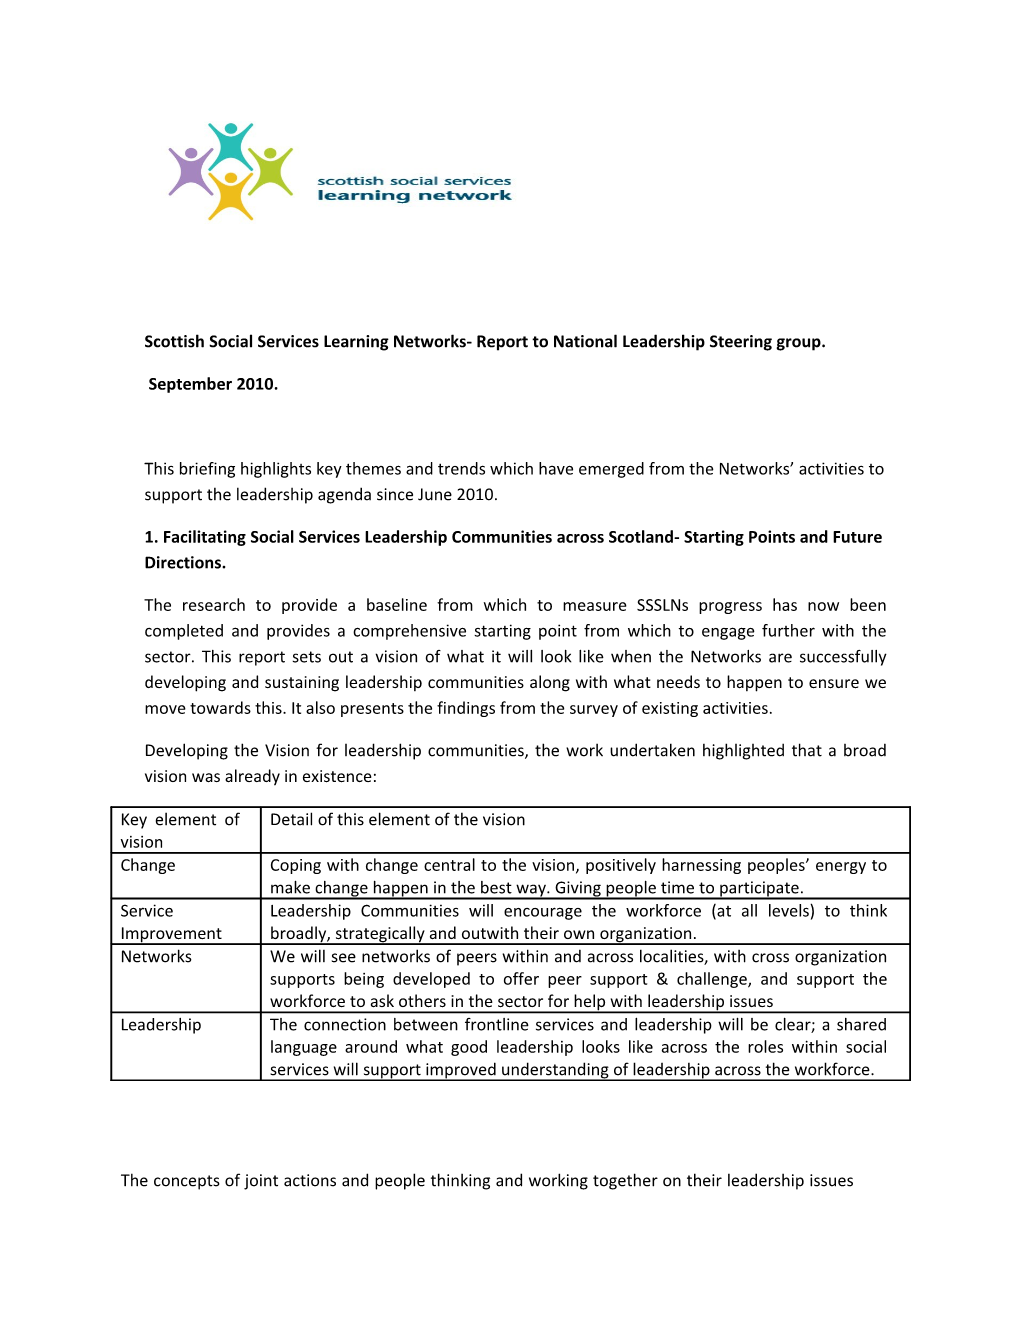 Scottish Social Services Learning Networks- Report to National Leadership Steering Group